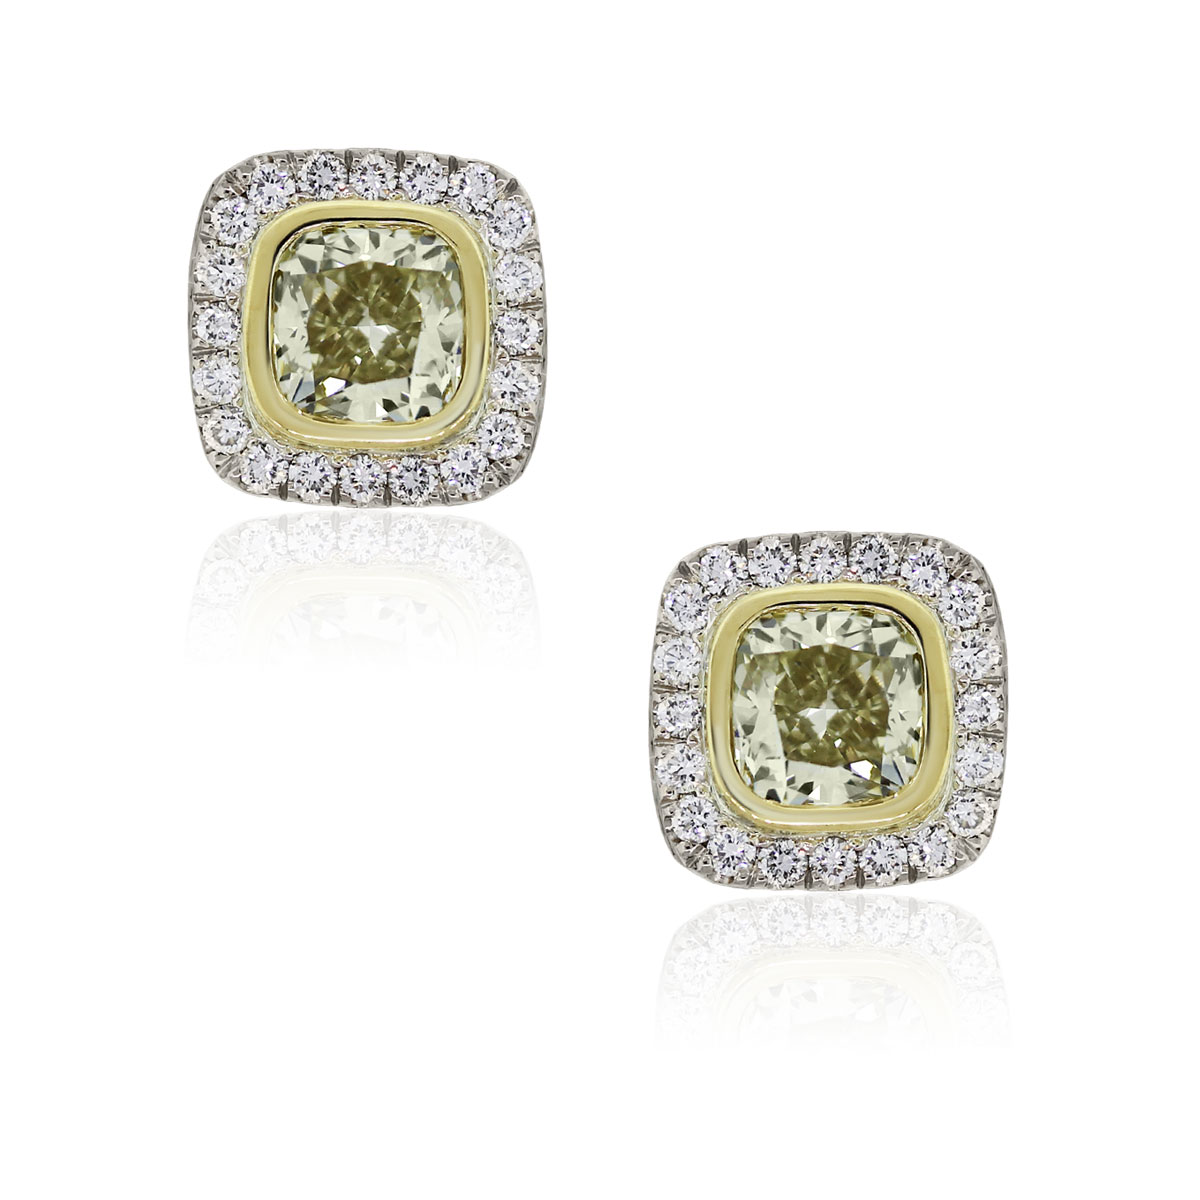 18k White Gold 4.62ctw Fancy Yellow and 0.85ctw White Diamond Earrings